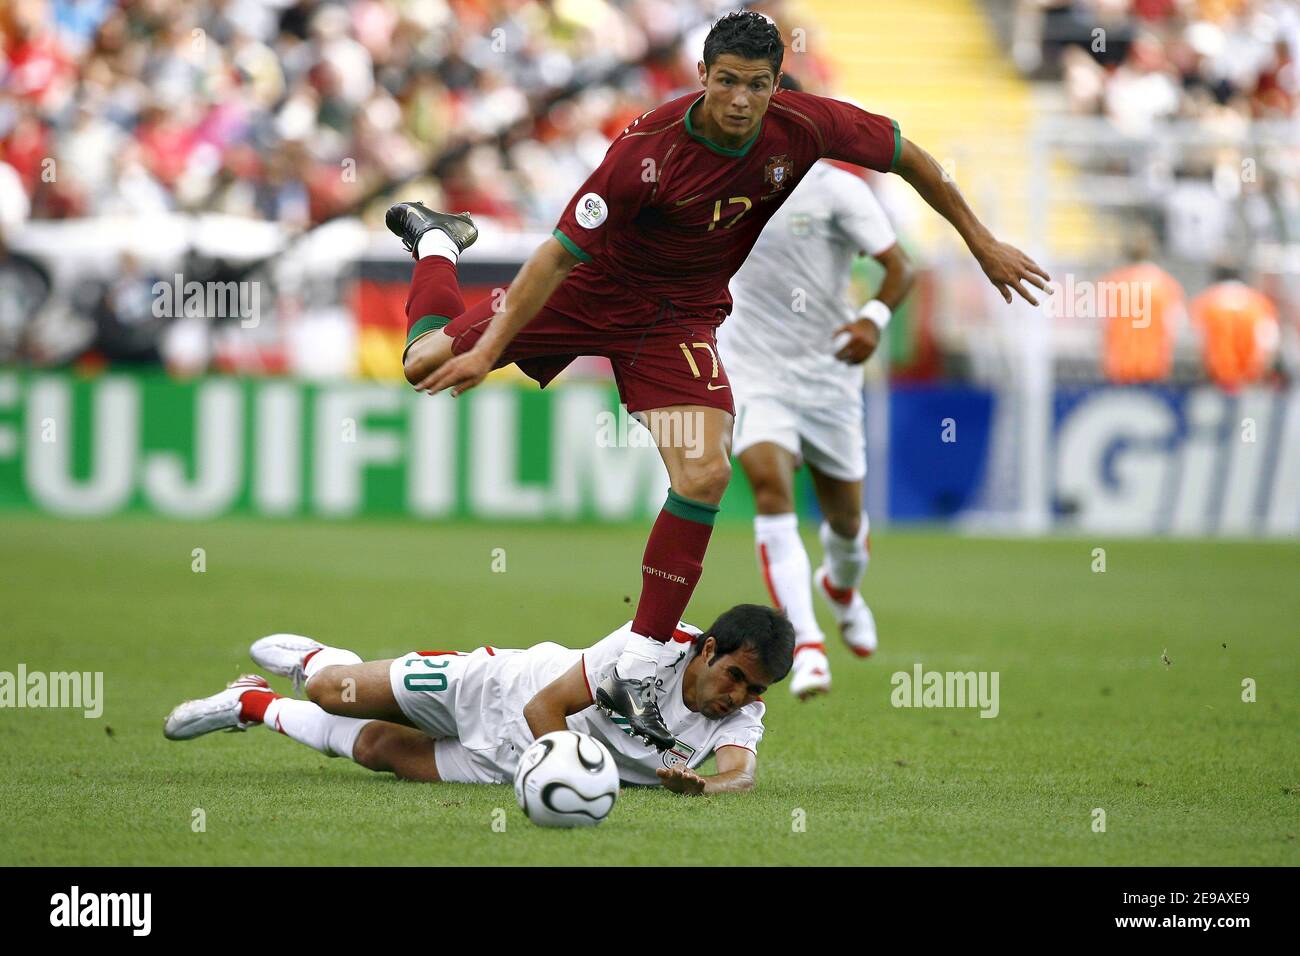 Portugal's Cristiano Ronaldo and Iran's Mohammad Nosrati battle for the ball during the World Cup 2006, Portugal vs Iran at the Fifa World Cup Stadium in Frankfurt, Germany on June 17, 2006. Portugal won 2-0. Photo by Christian Liewig/ABACAPRESS.COM Stock Photo